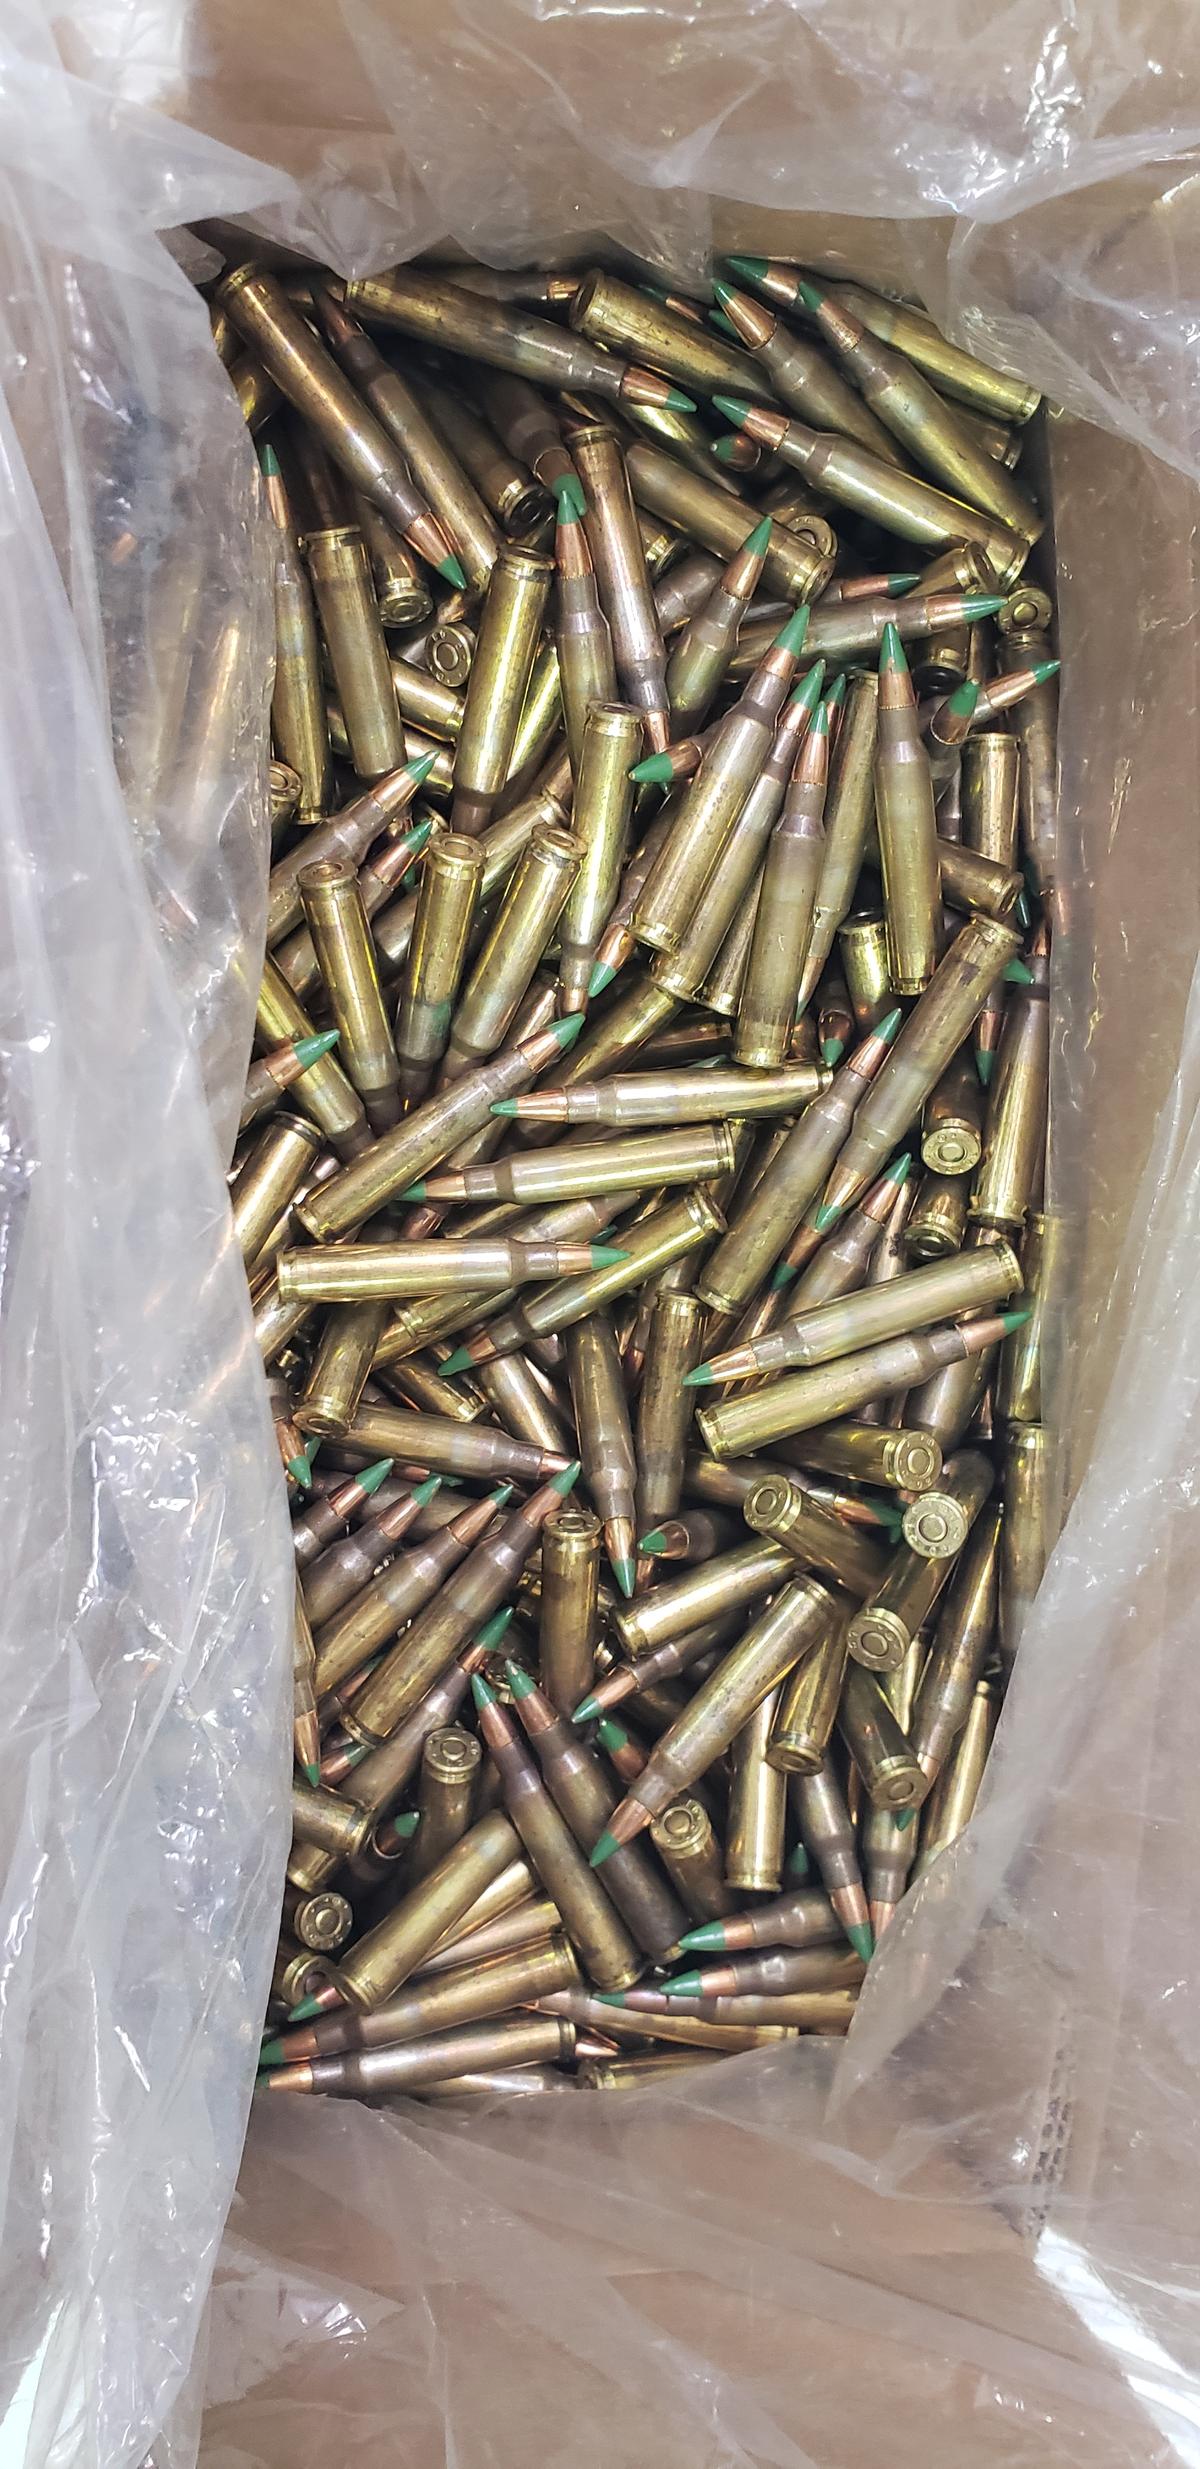 APPROXIMATELY ONE THOUSAND (1000) ROUNDS GREEN TIPPED, 5.56MM AMMO